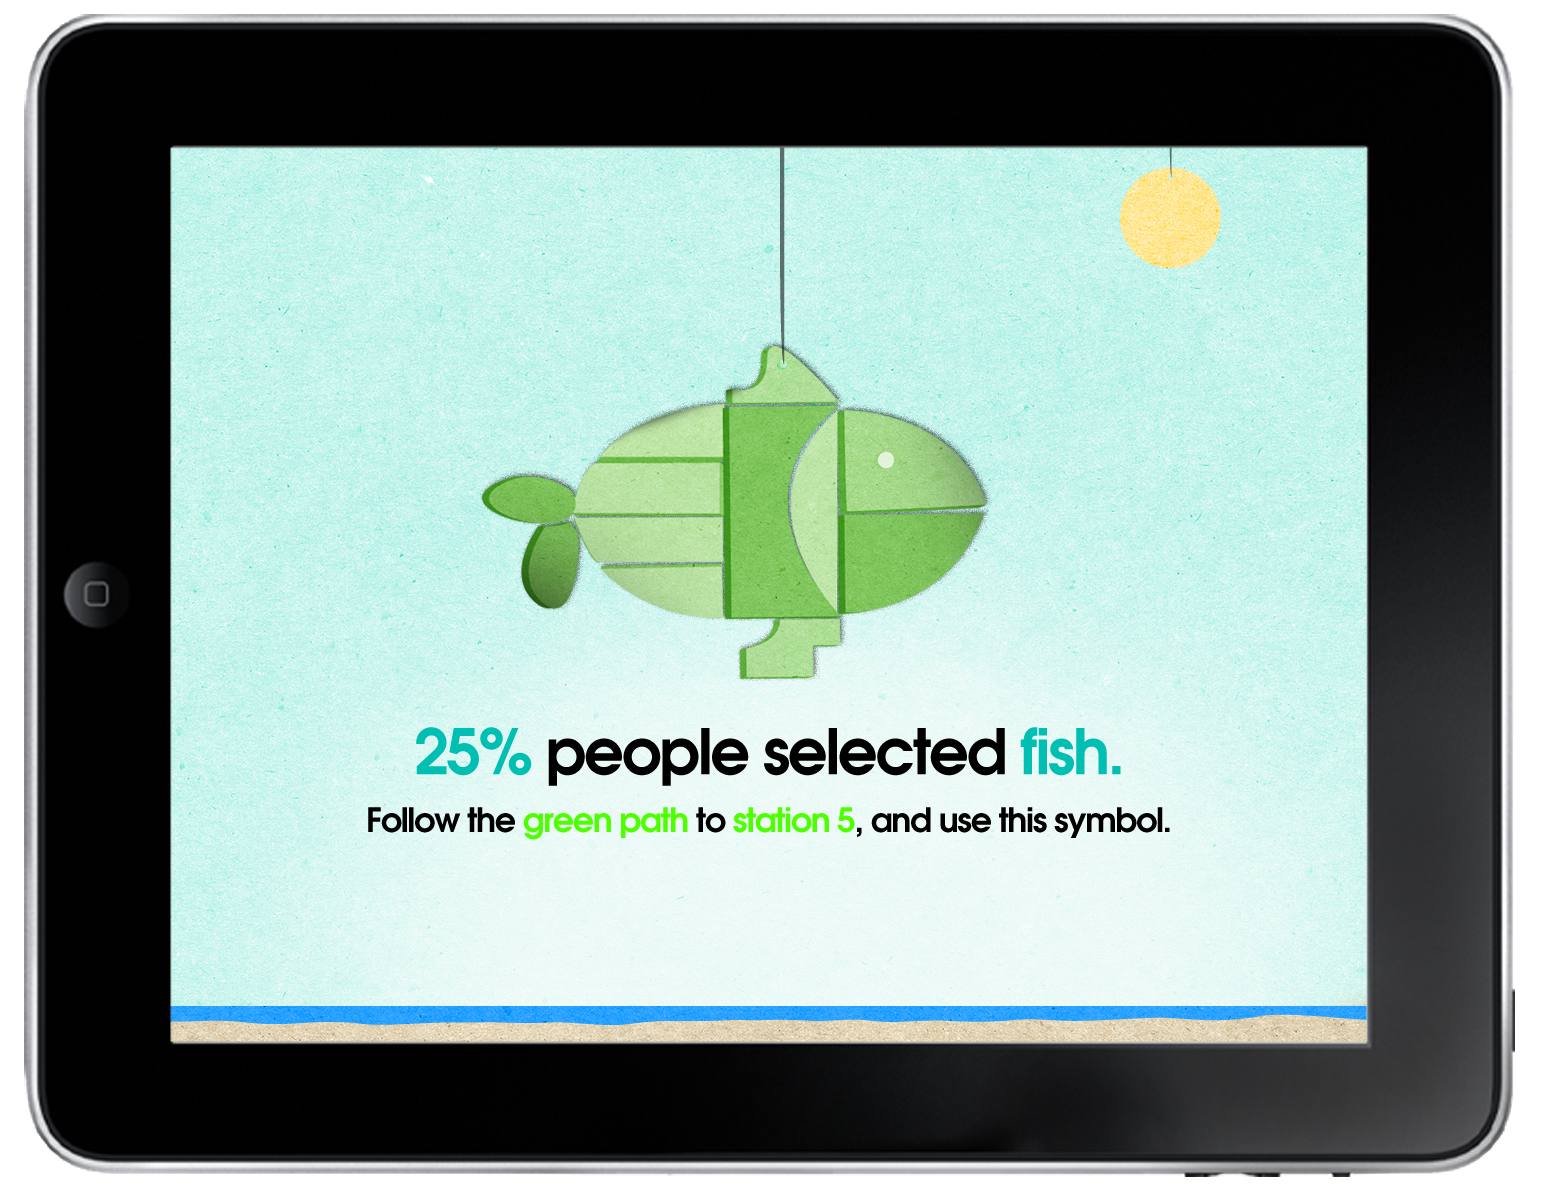 25% people selected fish.